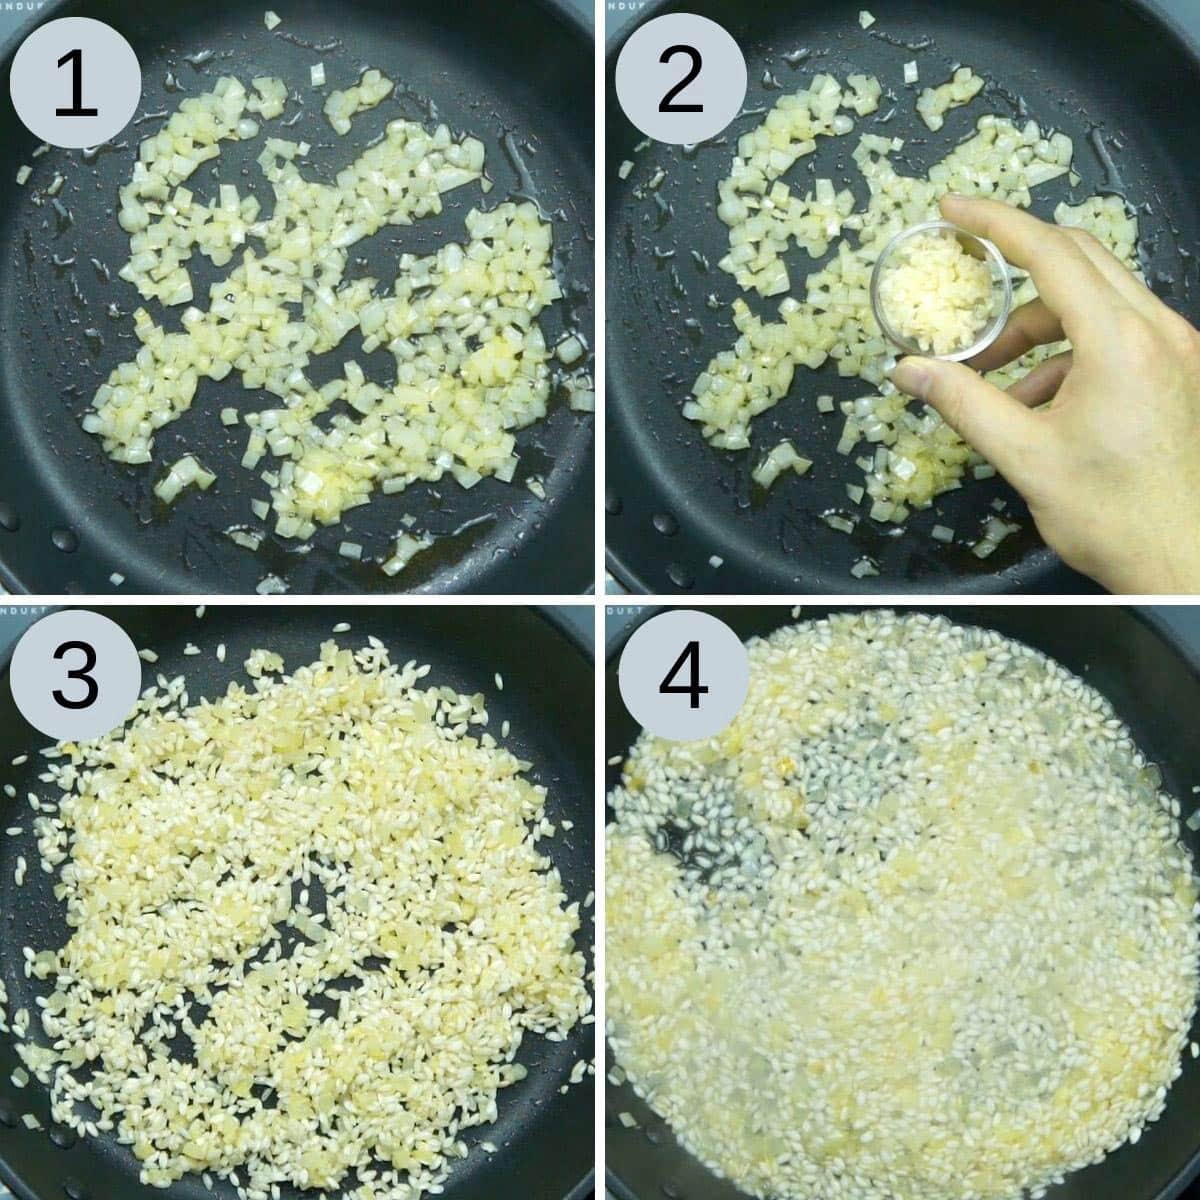 First 4 steps to make vegan risotto showing the pan with cooked onion, then garlic, then rice covered in oil and finally the rice is cooking in wine